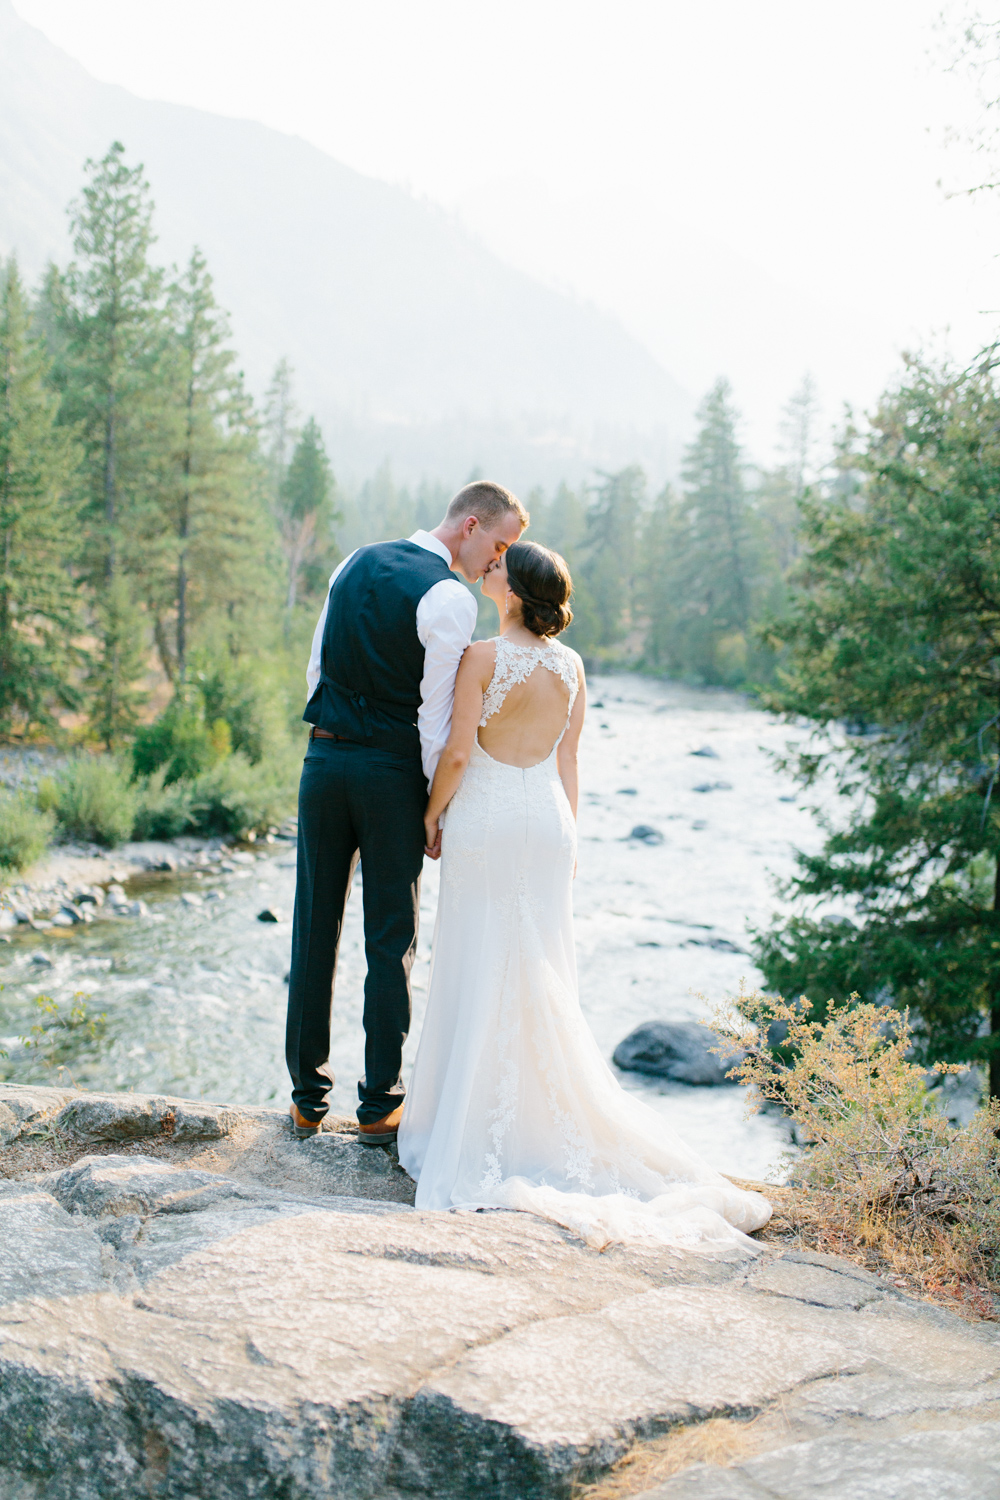 Grey and White Wedding in the Mountains of Leavenworth, Washington | Sleeping Lady | Classic and Timeless Wedding | VSCO | Stunning Mountain Top Bride and Groom Portraits on the Icicle River.jpg-1393.jpg